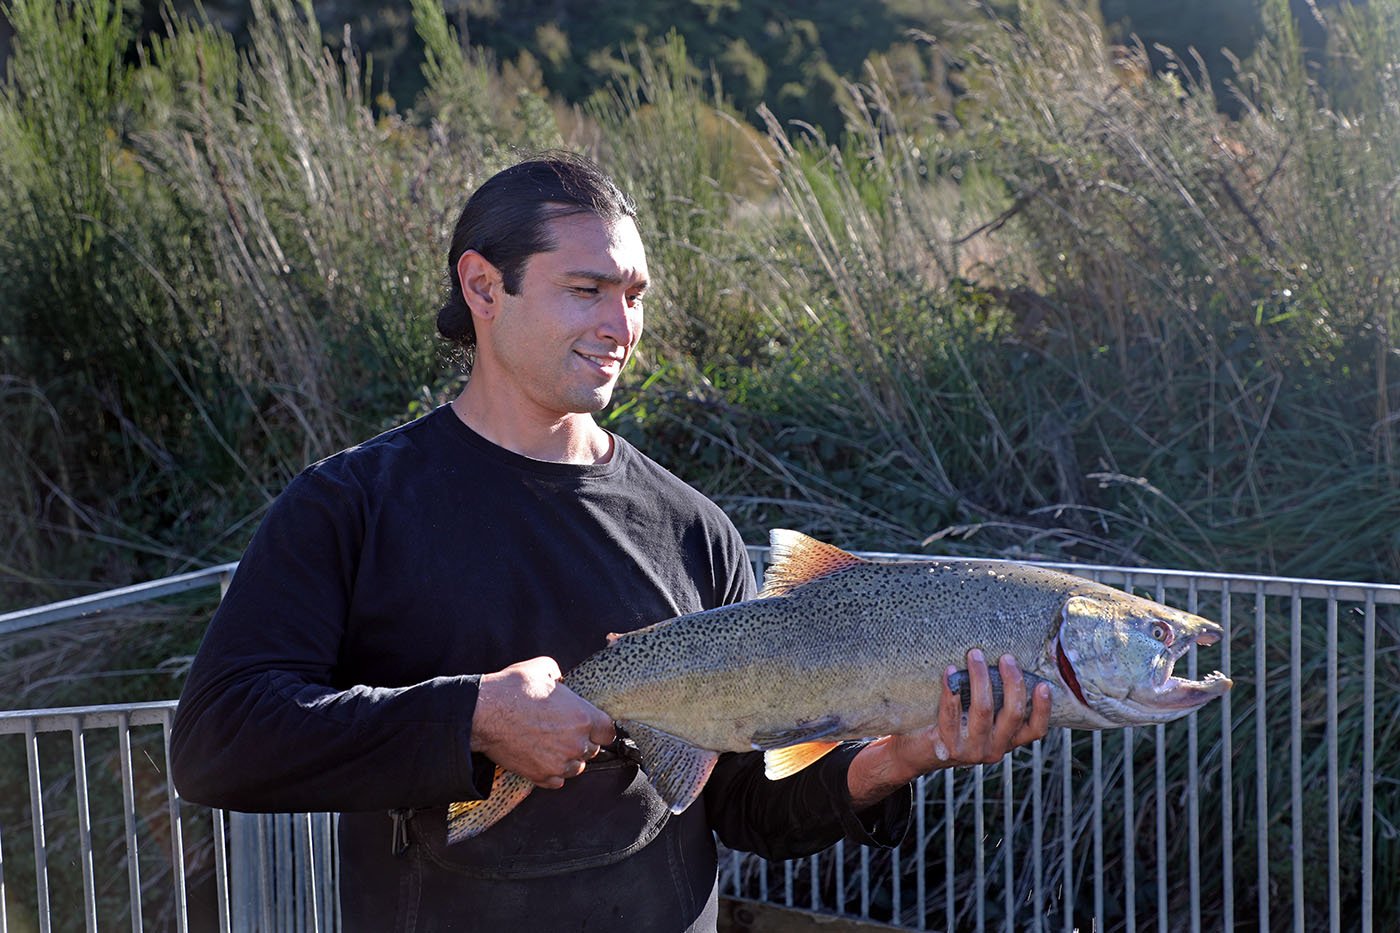  Michael Preston has visited New Zealand several times to support Winnemem Wintu efforts to return those fish to the McCloud River. Photo: Richard Cosgrove  